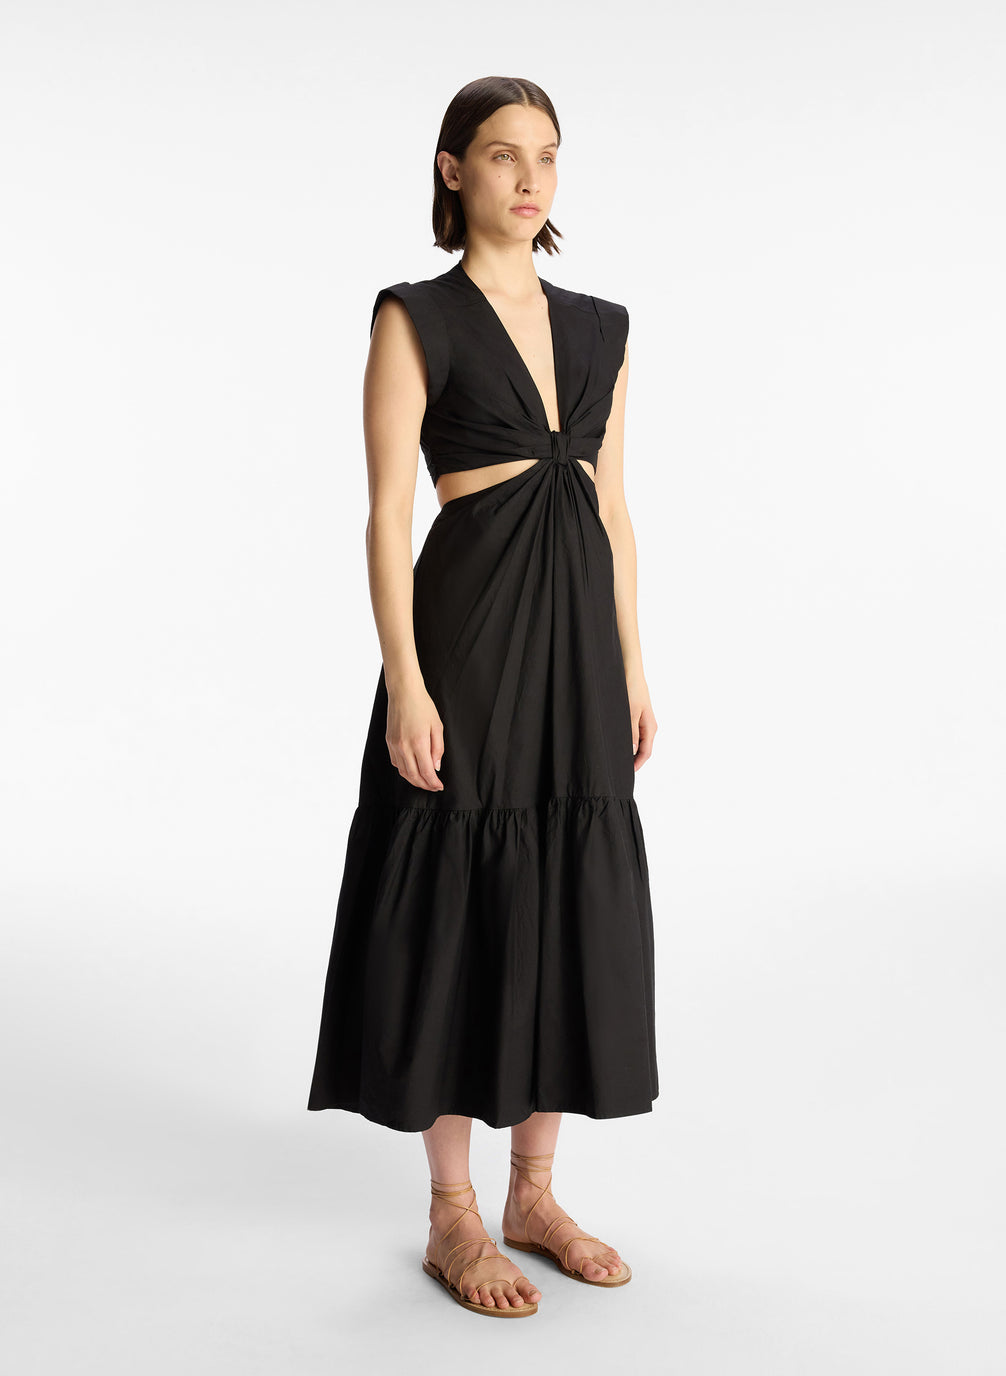 Easy Black Jersey Dress - Adored By Alex